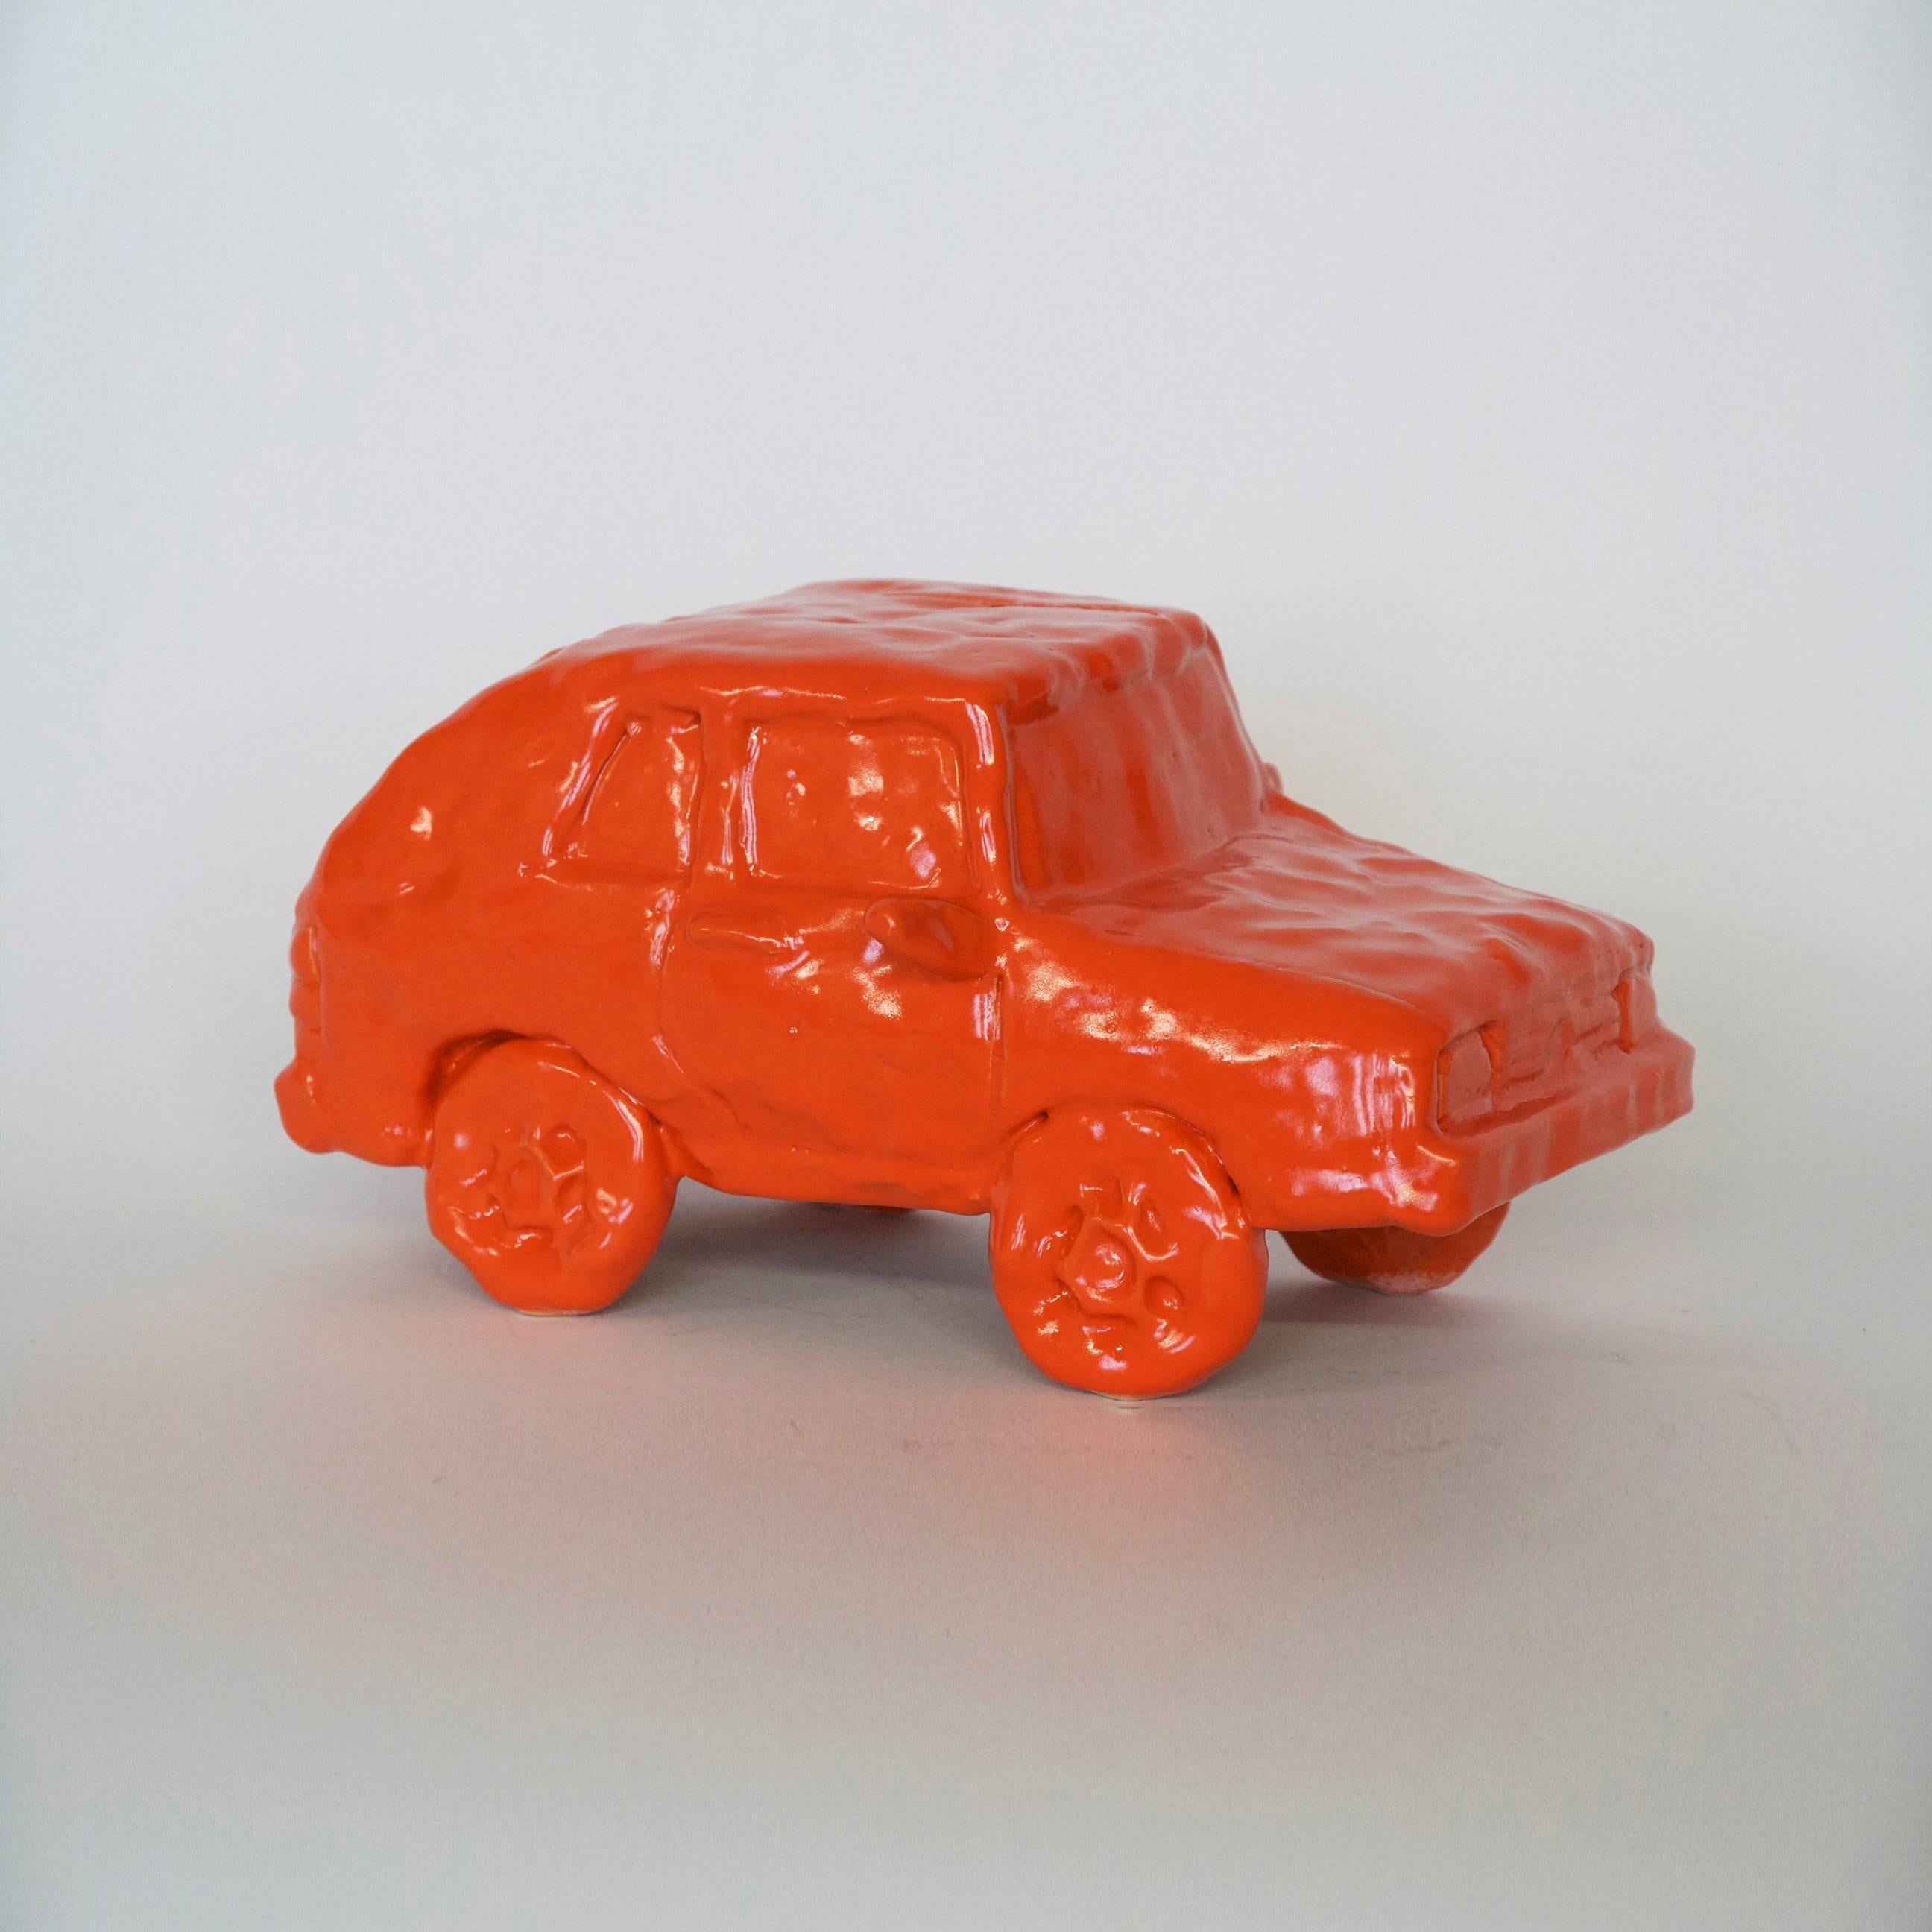 Keith Simpson has made these types of ceramic vehicles intermittently over the past years. He likes to make the underdog car models. Keith says, "They are like the cars that you might inherit from your grandparents if you had your sweet 16 in a